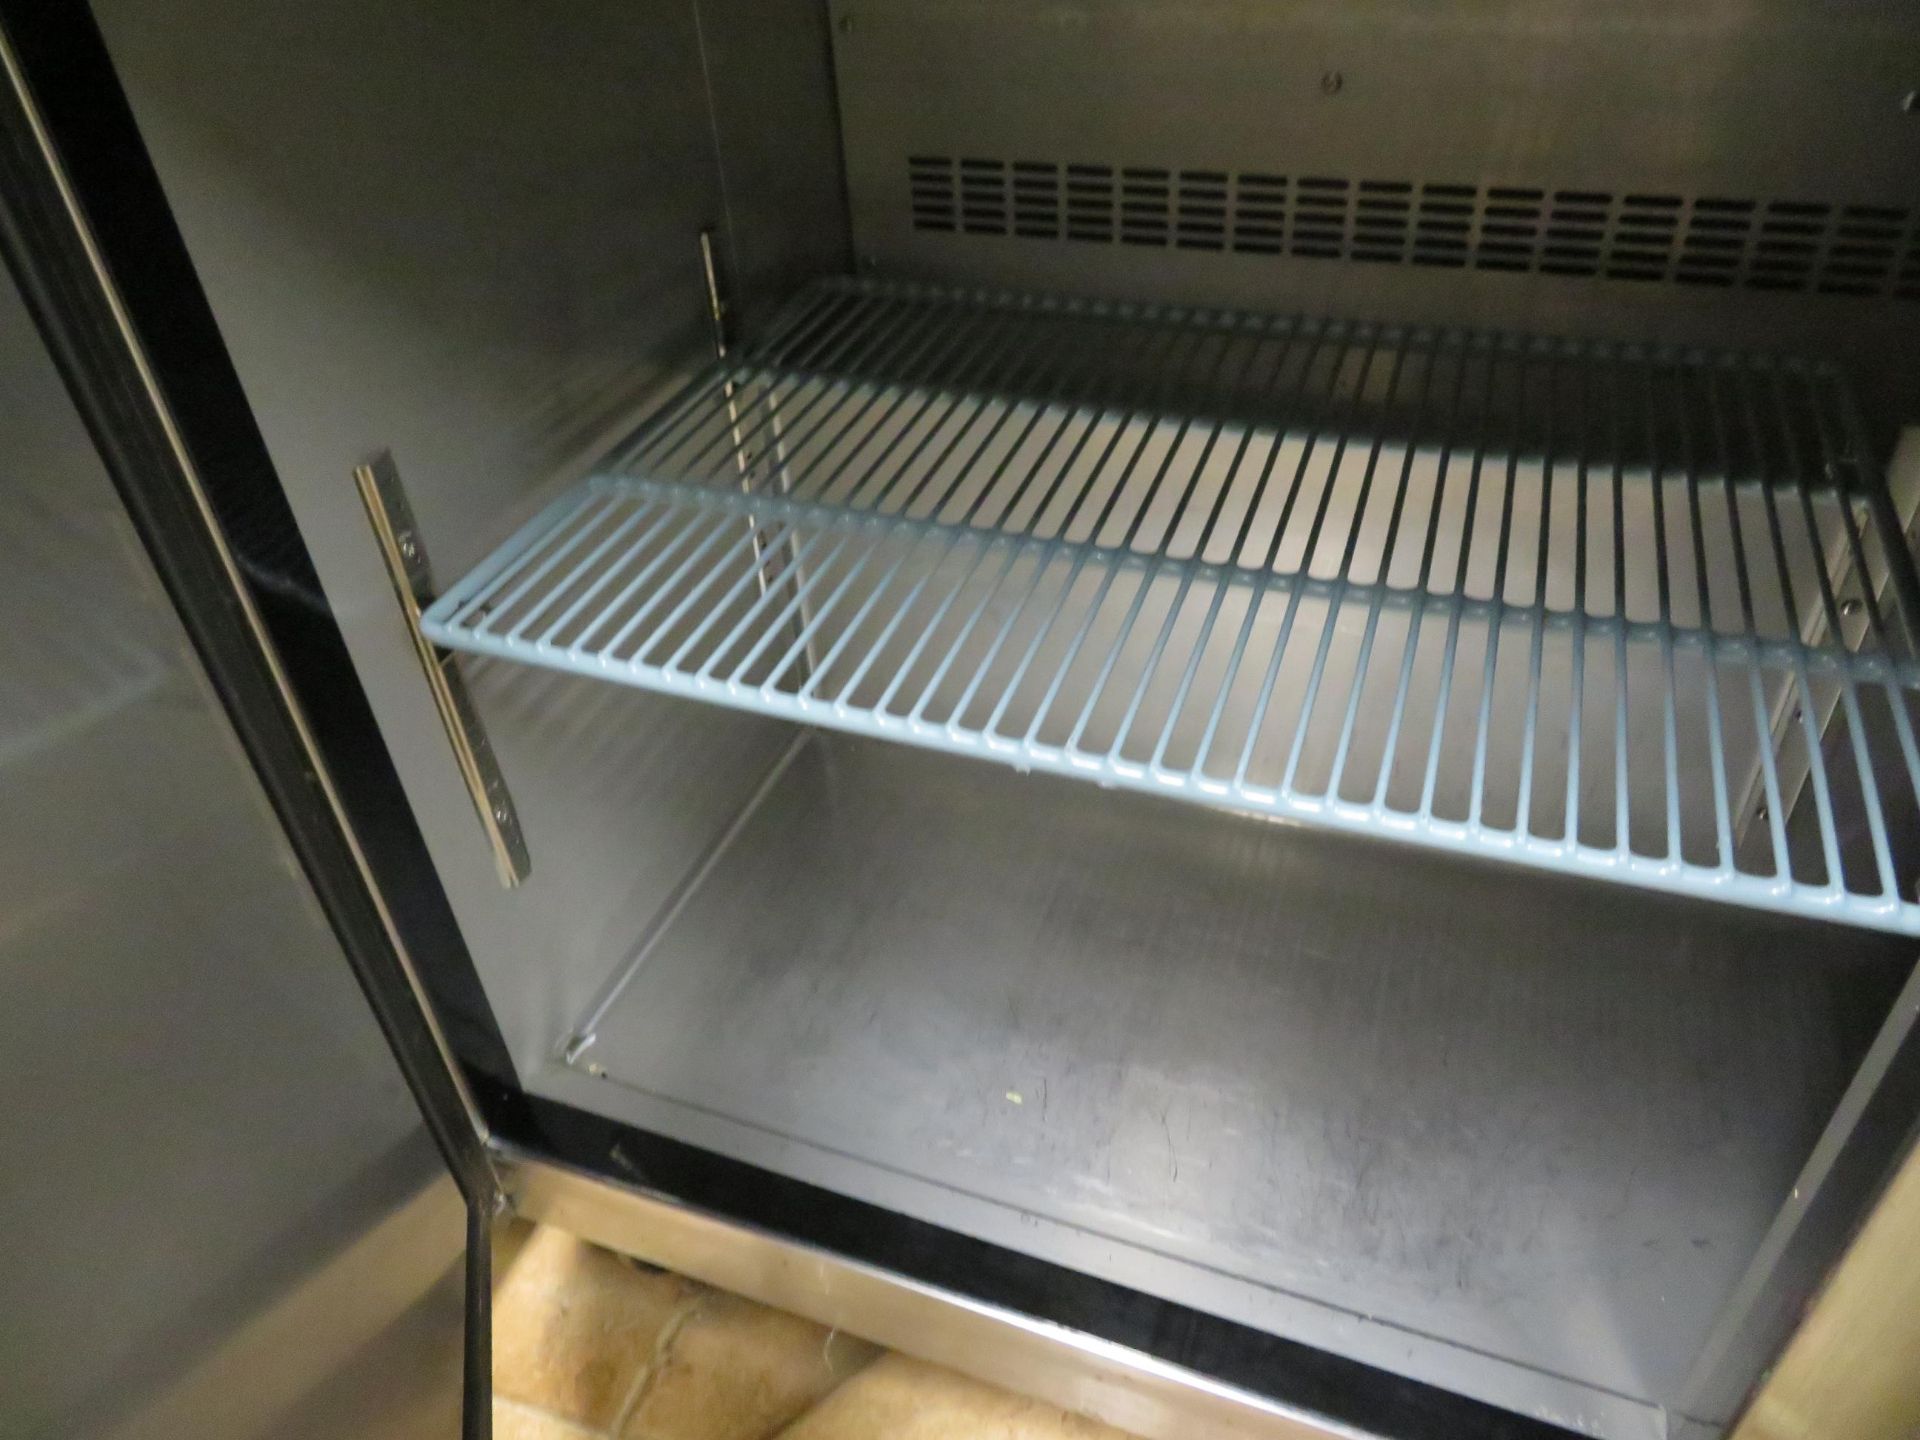 3 door refrigerated preparation table, Mod # MPT-072-SA, approx. 72"w x 32"d x 36"h - Image 3 of 4